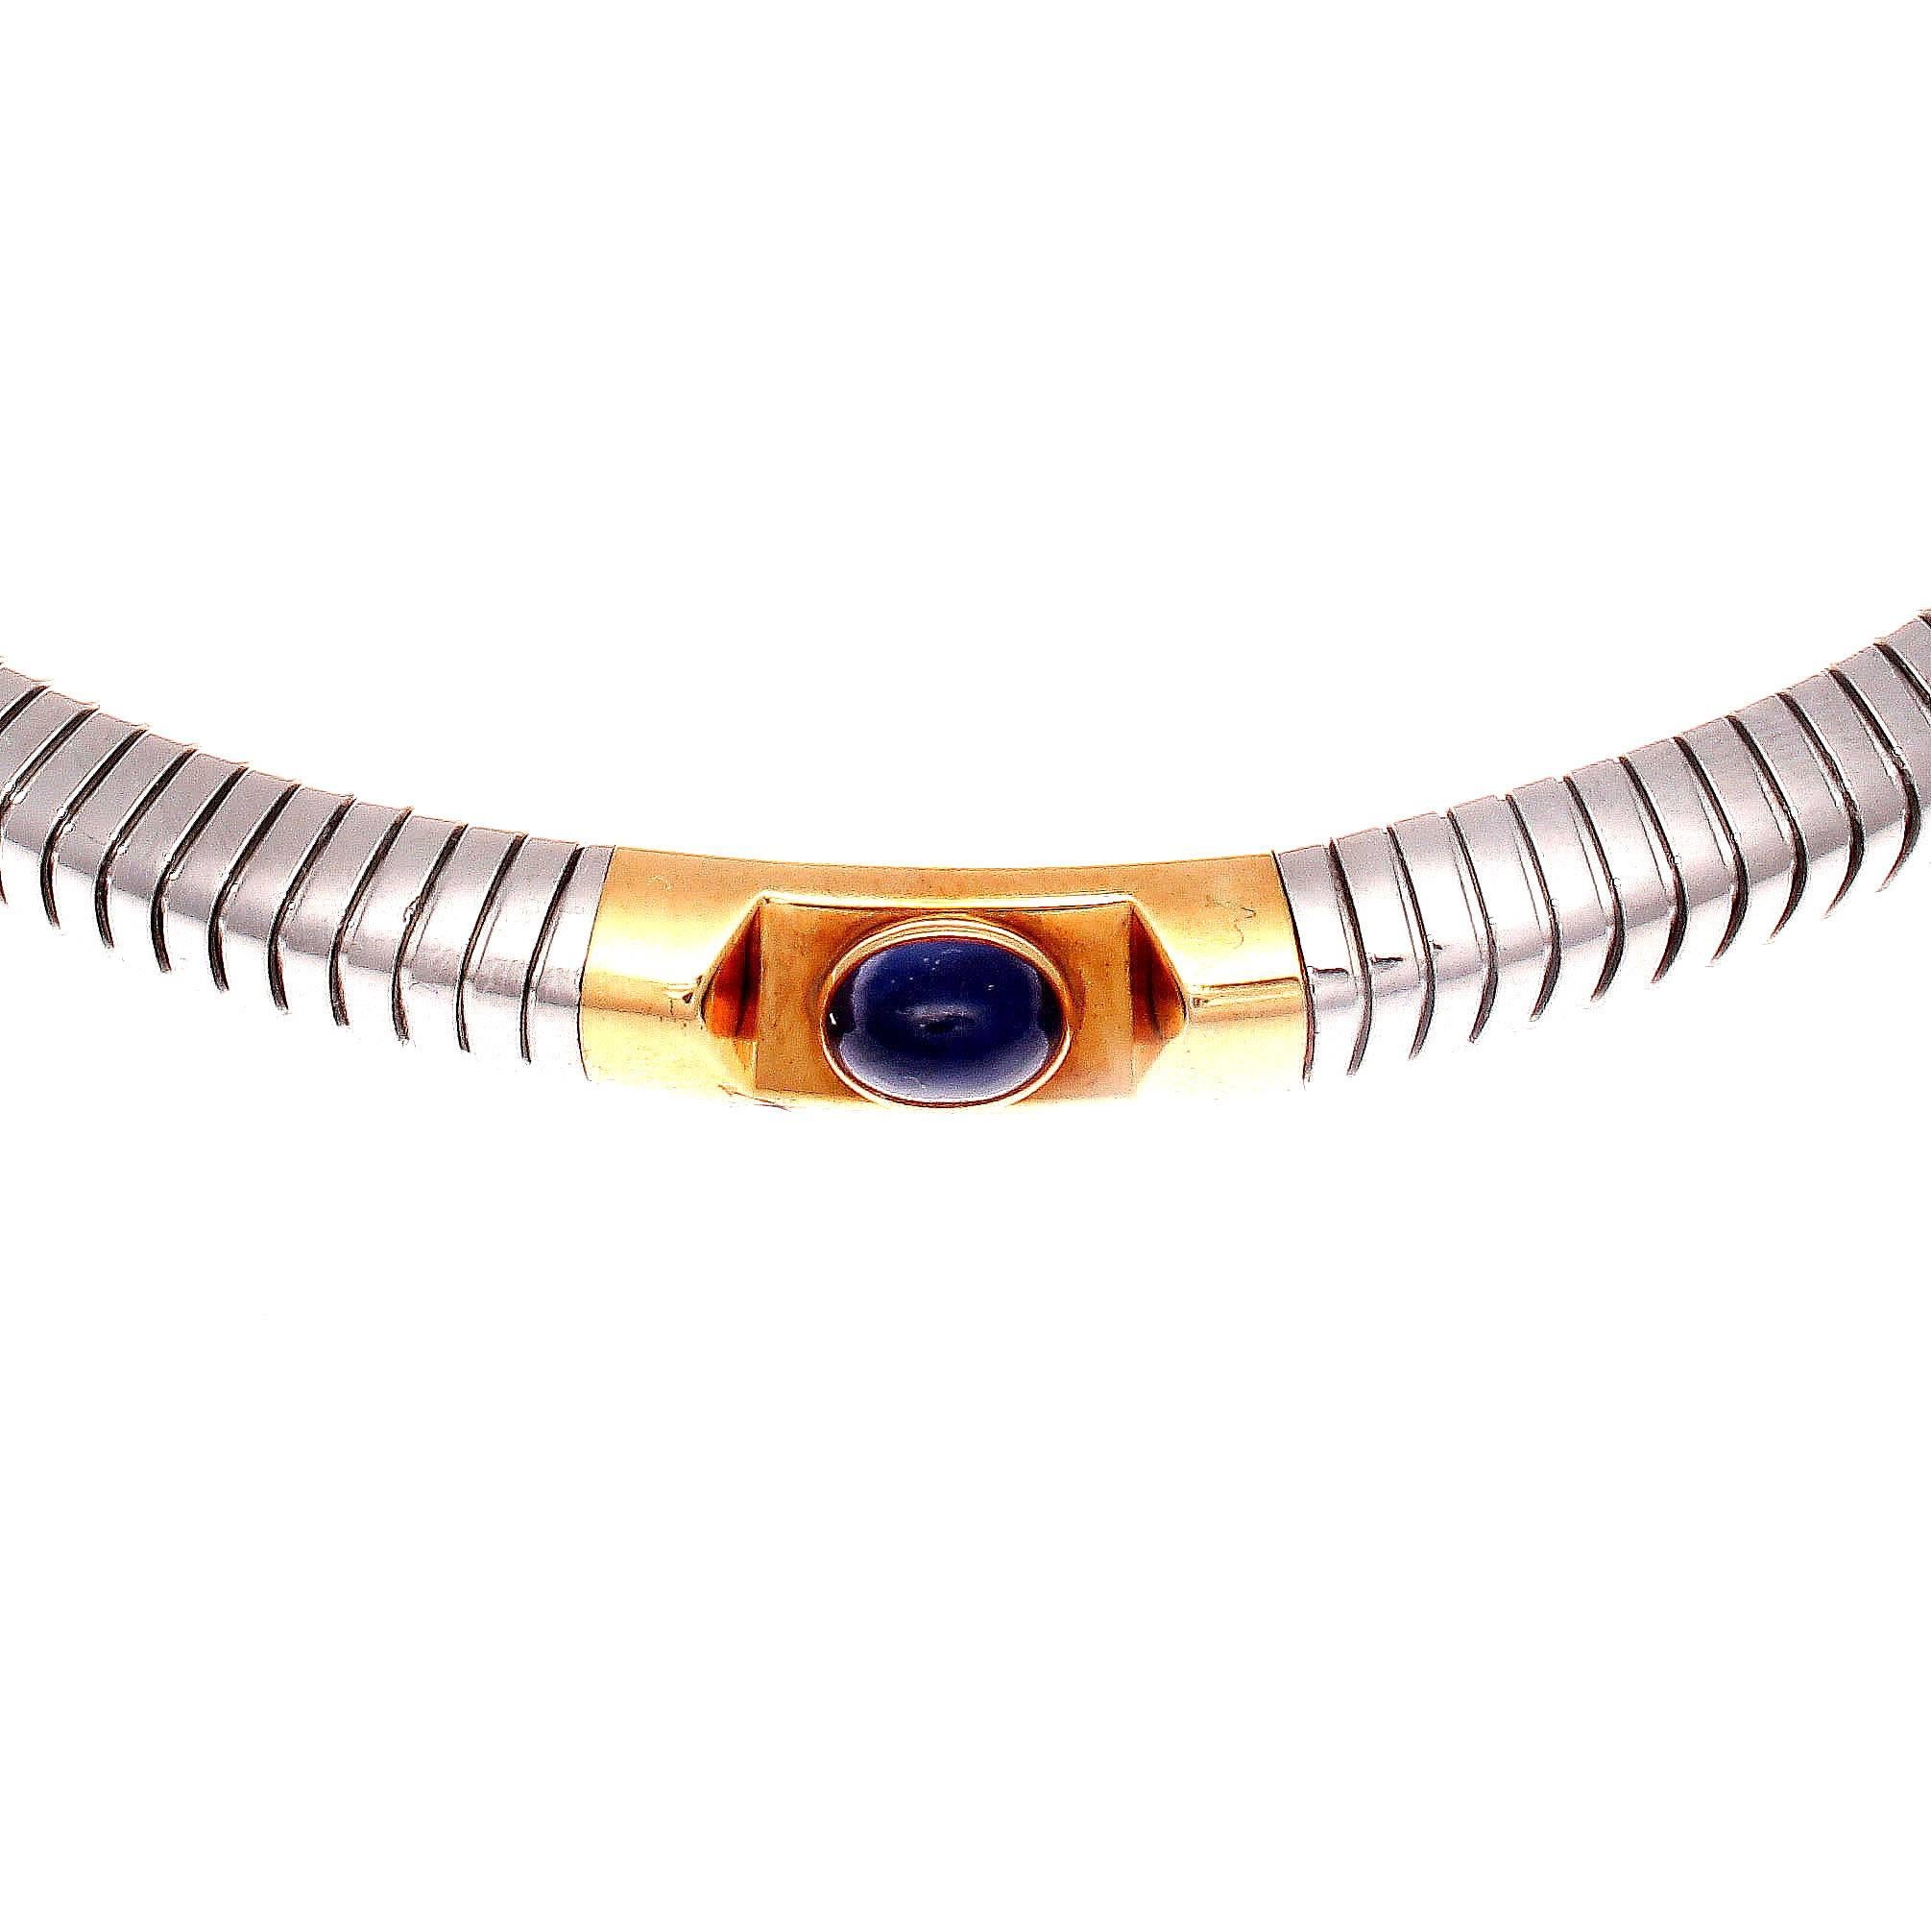 Combining two of Bulgari's most iconic designs, cabochon cut gemstones and tubogas. The Tubogas design was first introduced in the 1940's and is a unique process because the way the metal is braided it does not need soldering together; this is a